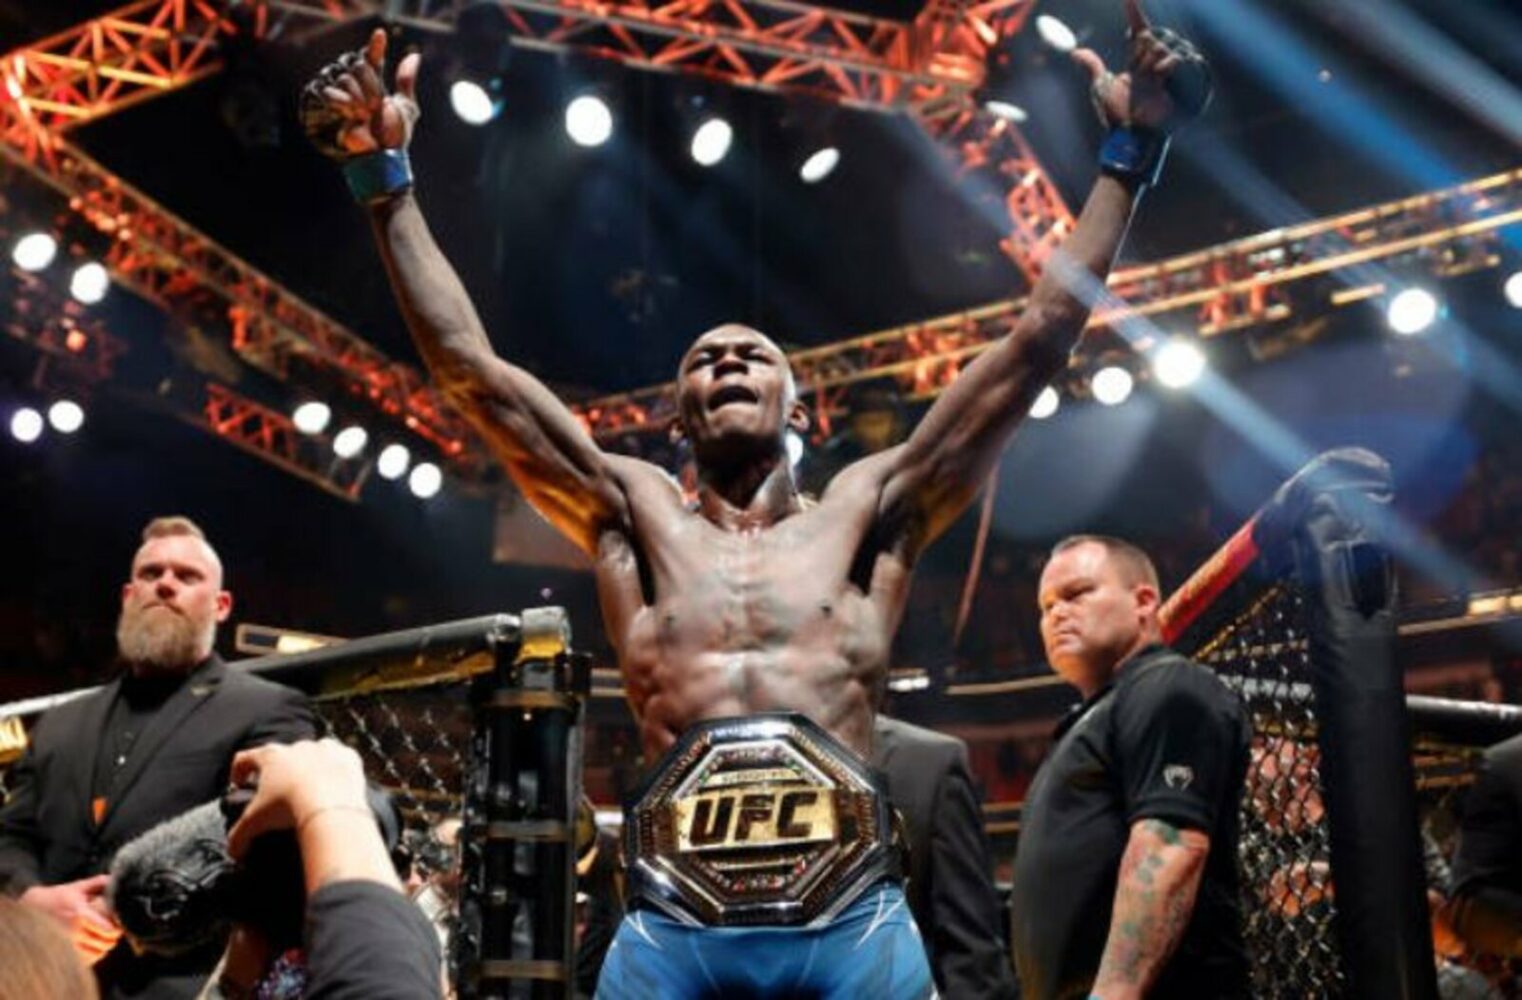 BREAKING: Israel Adesanya Knocks Out Pereira in 2nd Round, Reclaims UFC Title [Video]